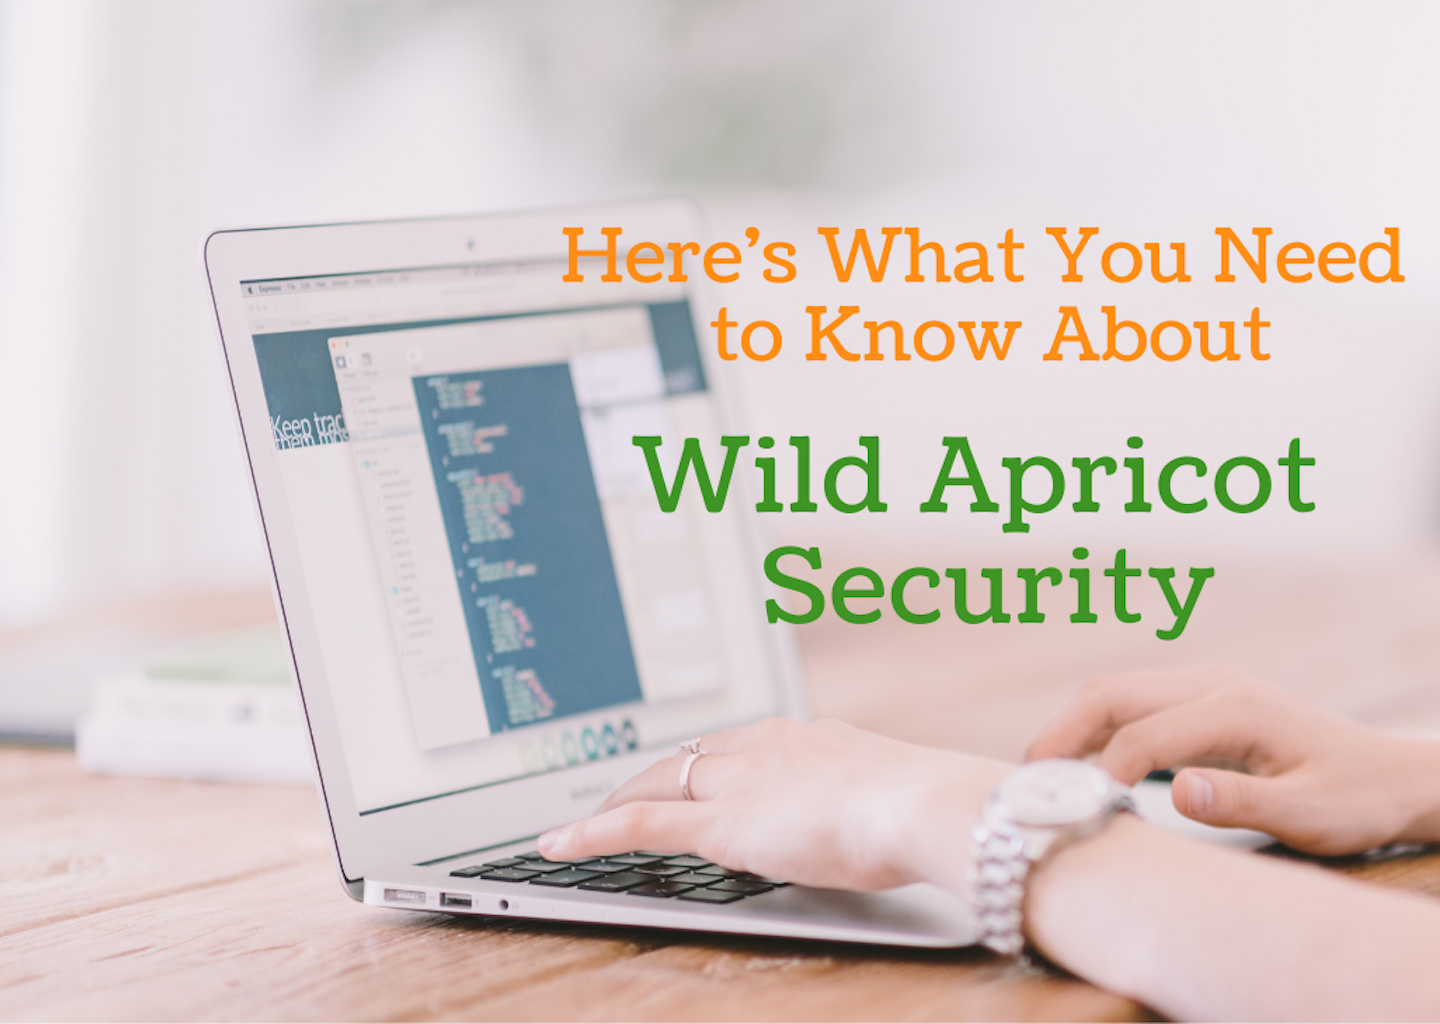 Here’s What You Need to Know About WildApricot Security